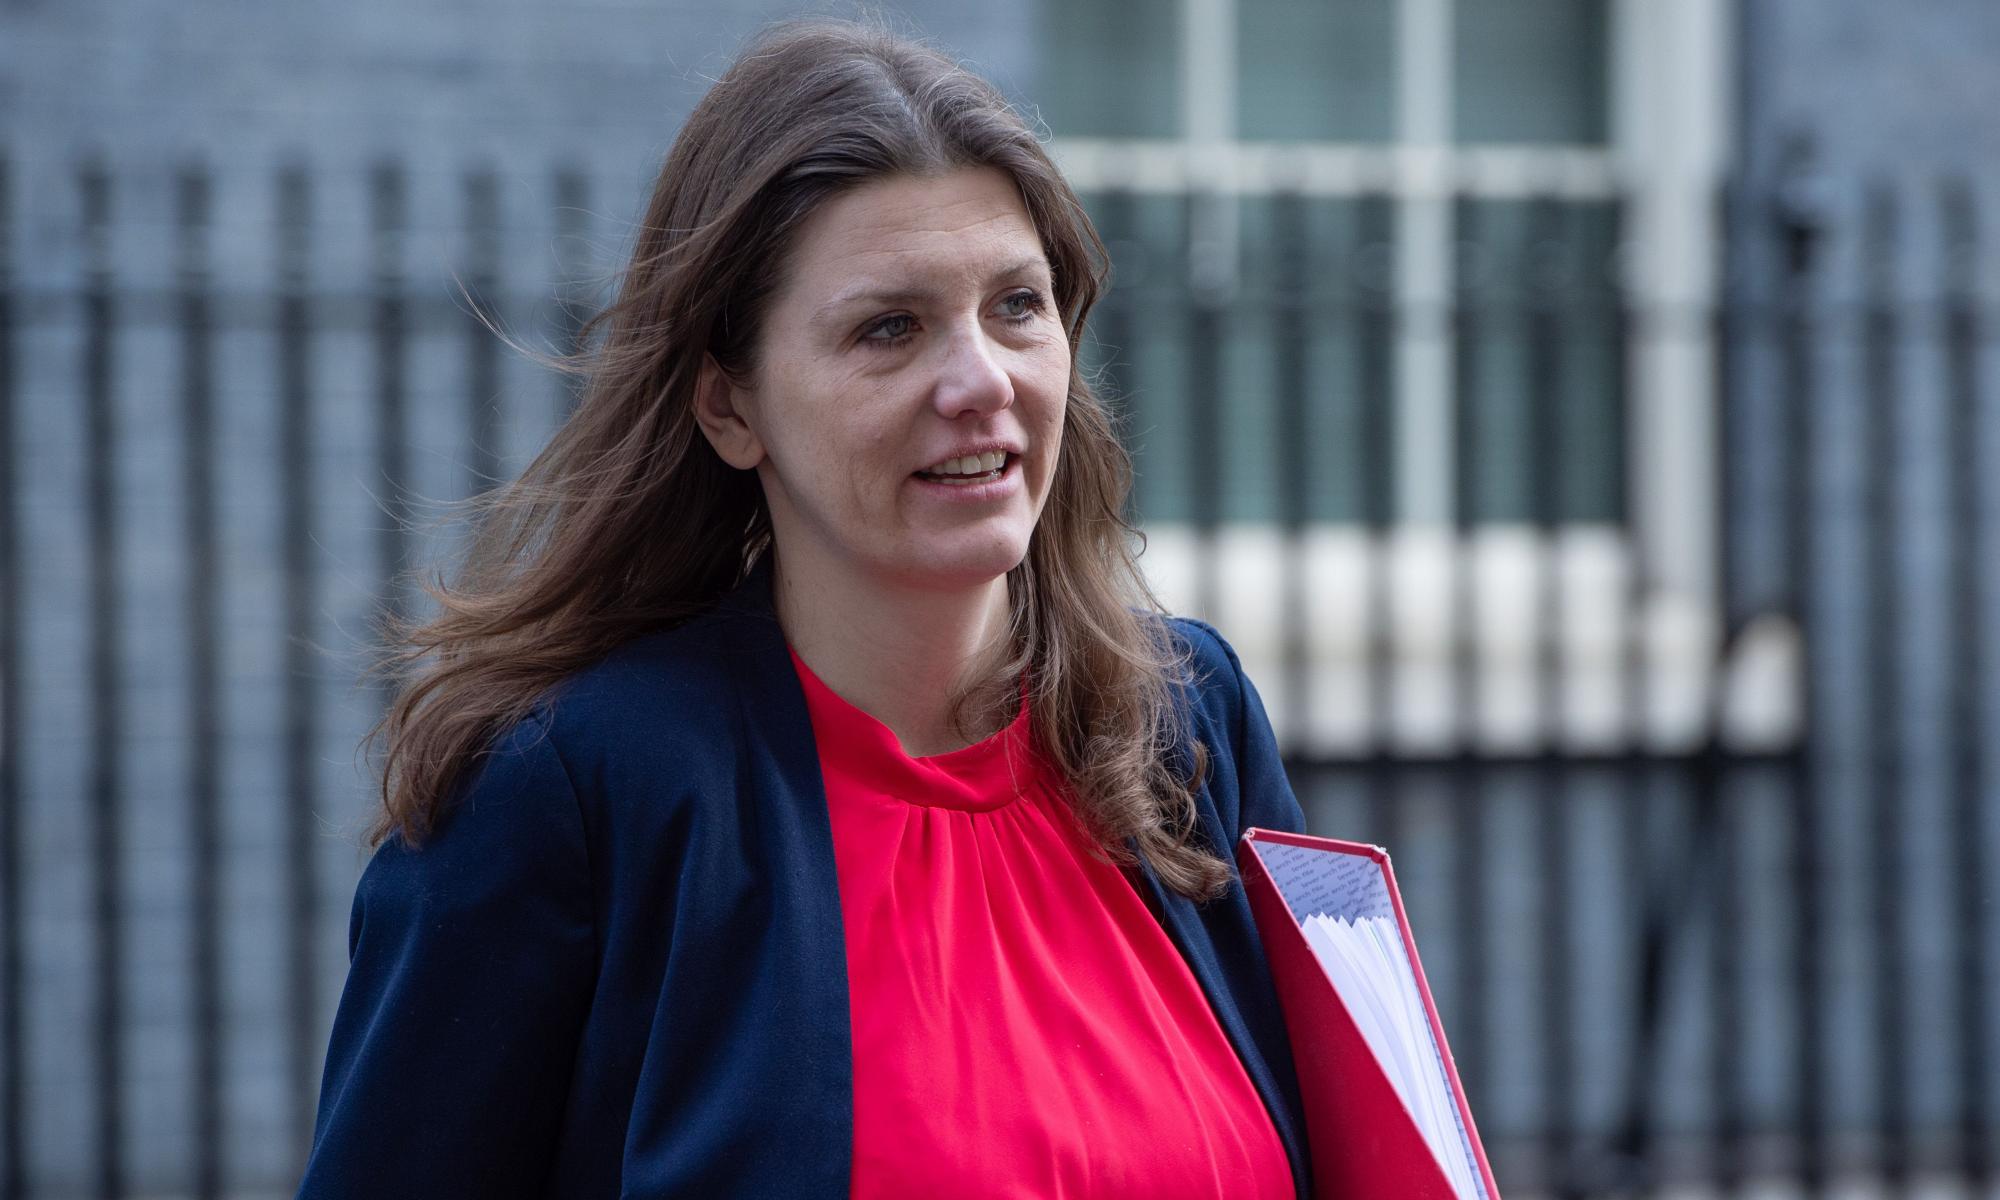 michelle donelan used £34,000 of taxpayer funds to cover libel costs